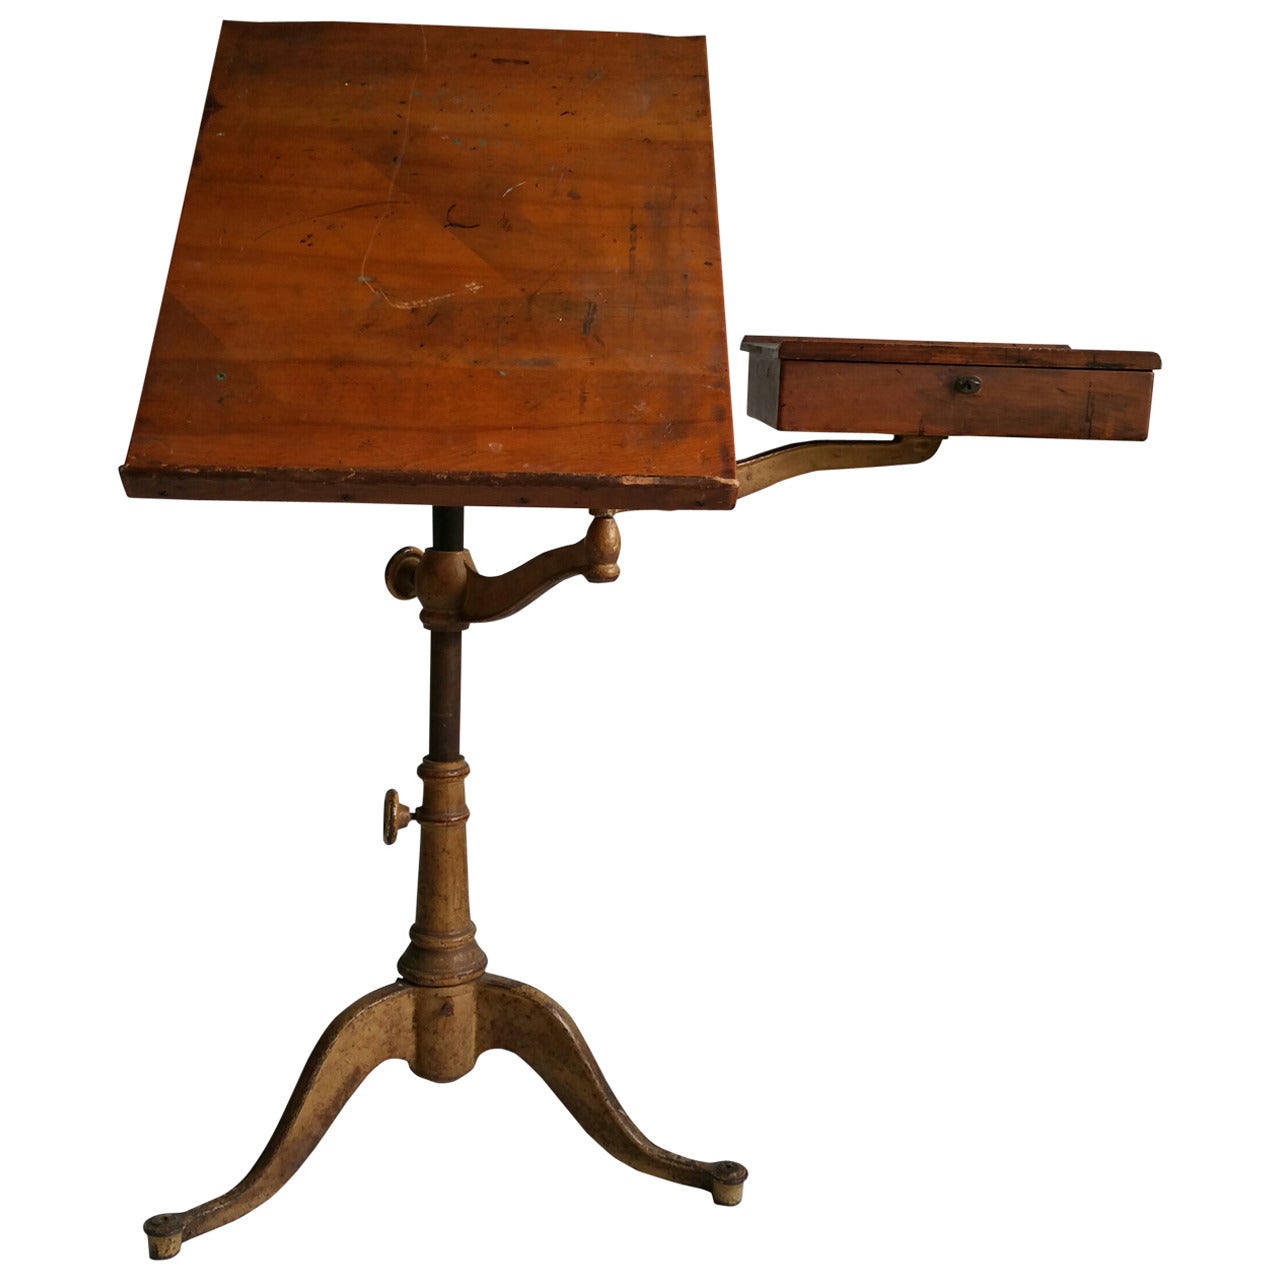 Rare 19th Century Drafting Table with Swing-Out Drawer